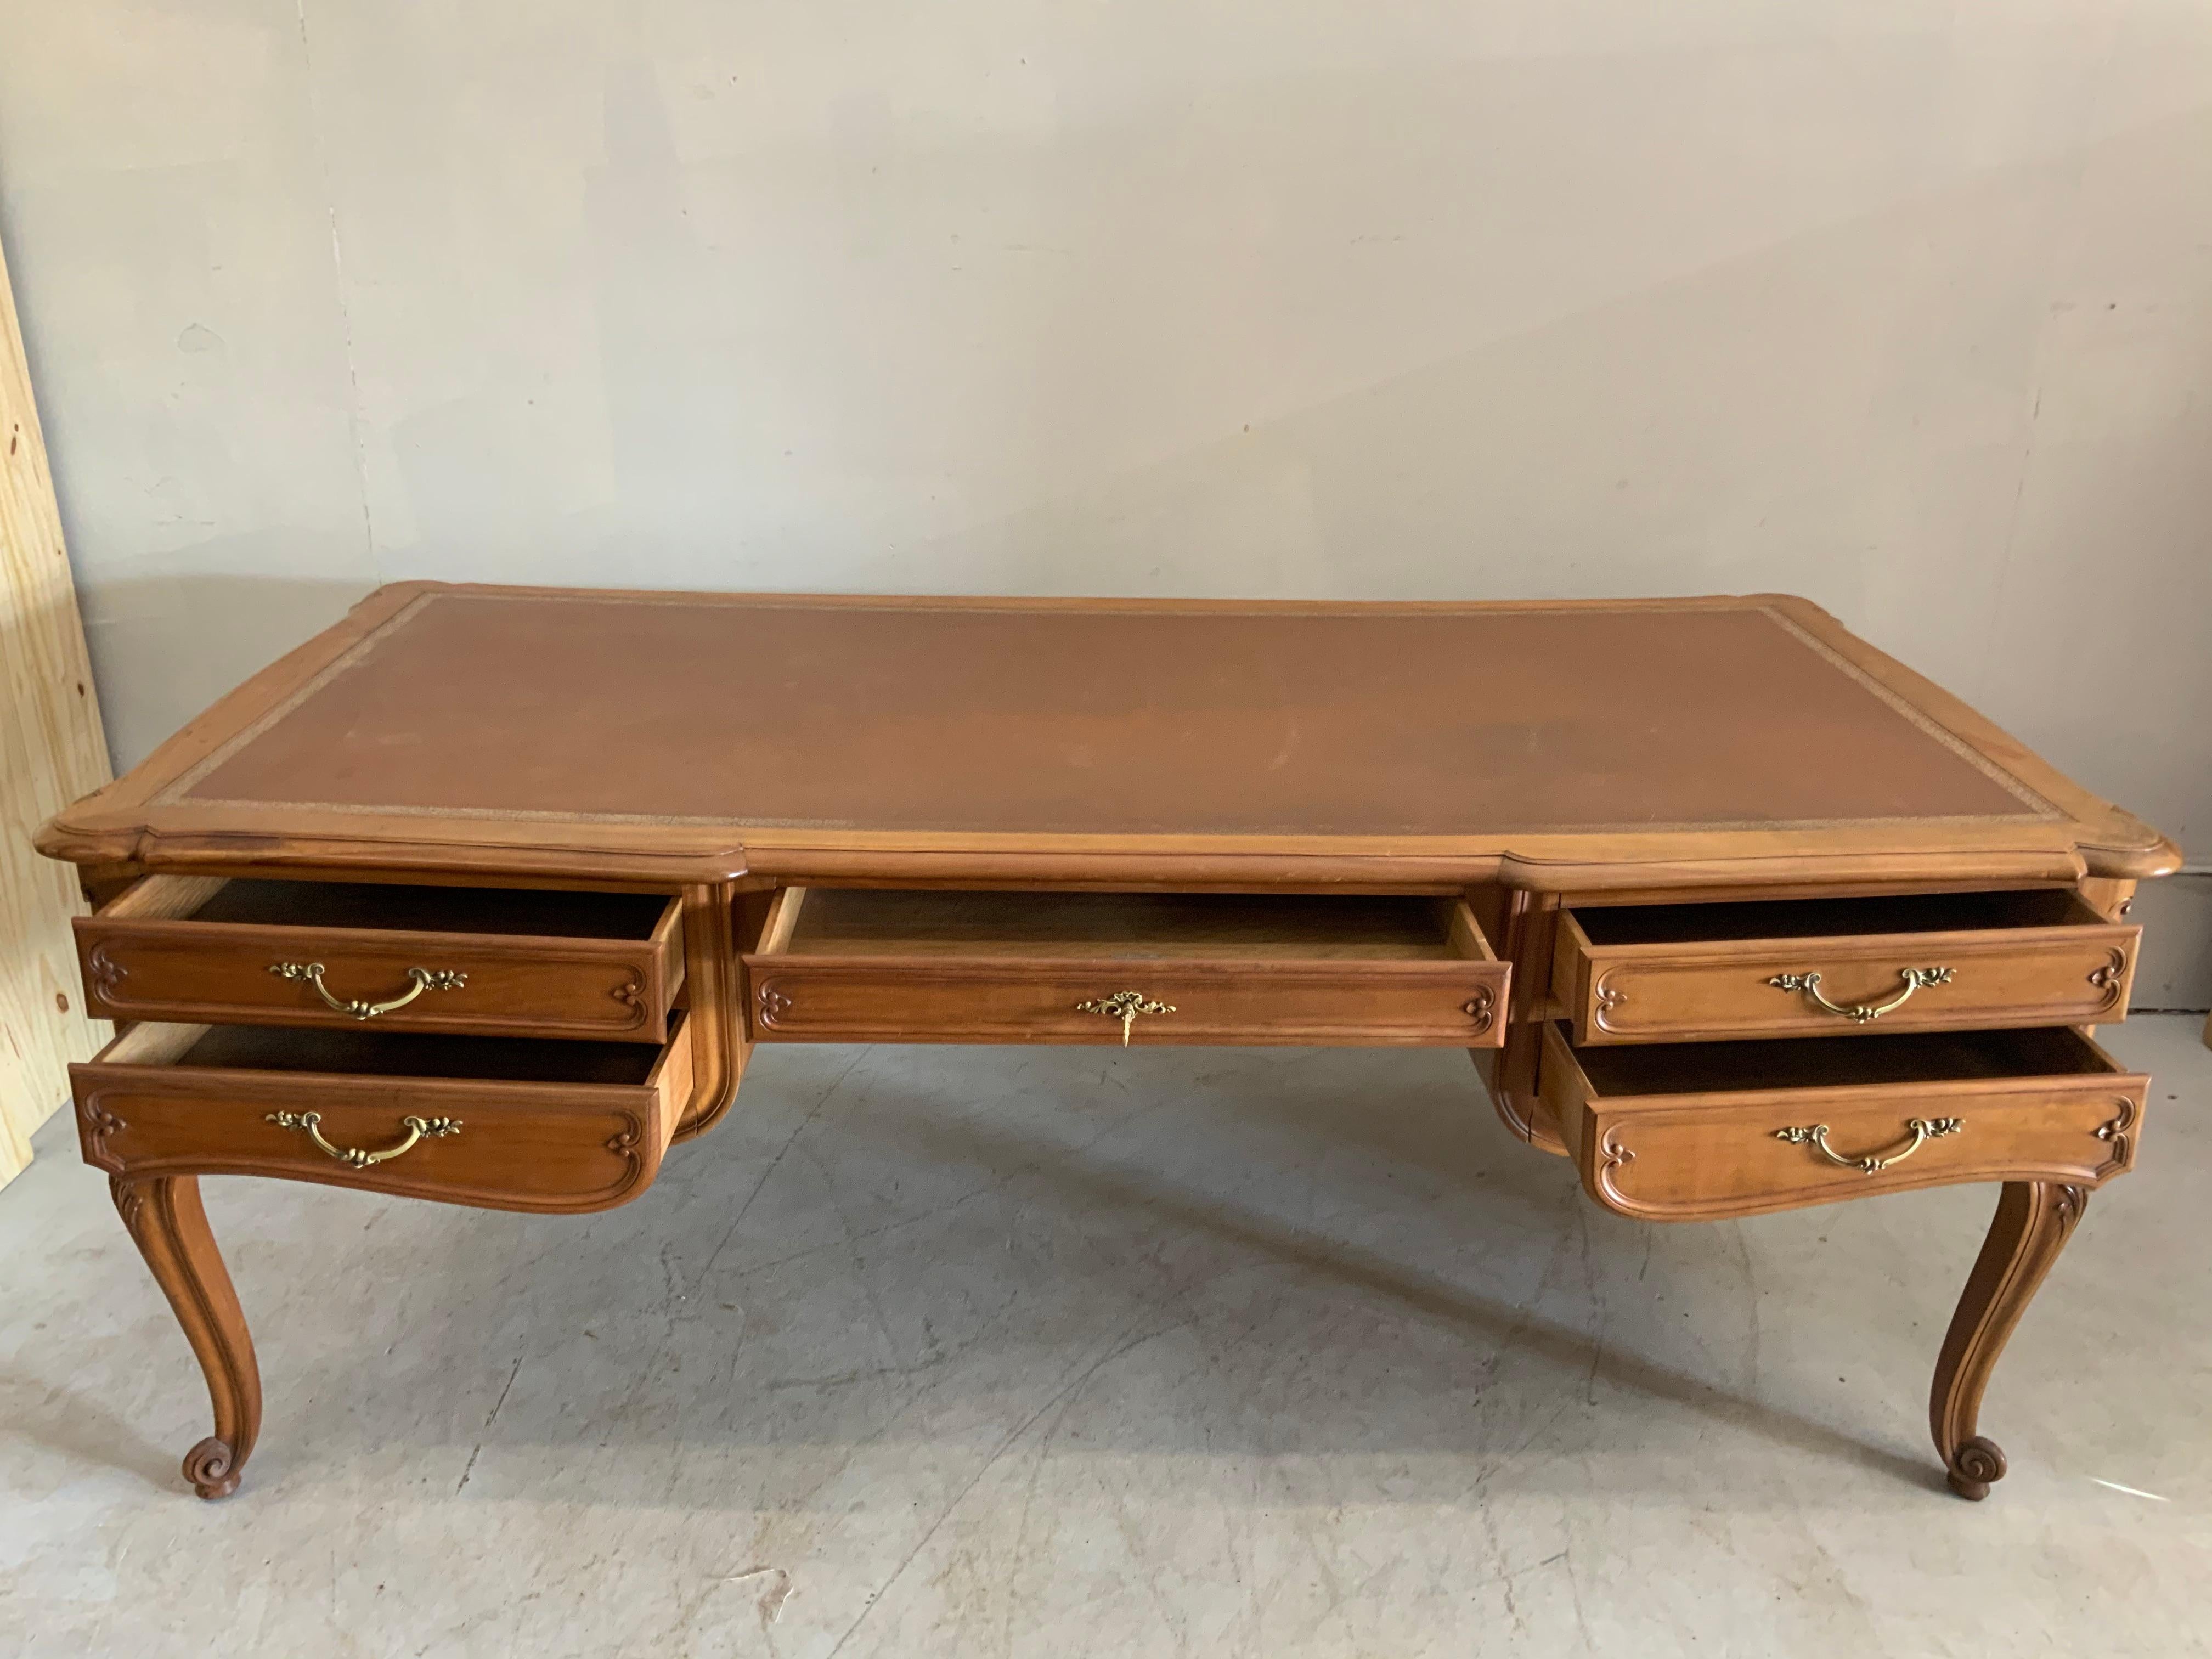 French desk Louis XV style, varnished with a top in leather in good condition, 5 drawers and in walnut wood. This piece comes from the Loire in the middle of France in the region of the castles.